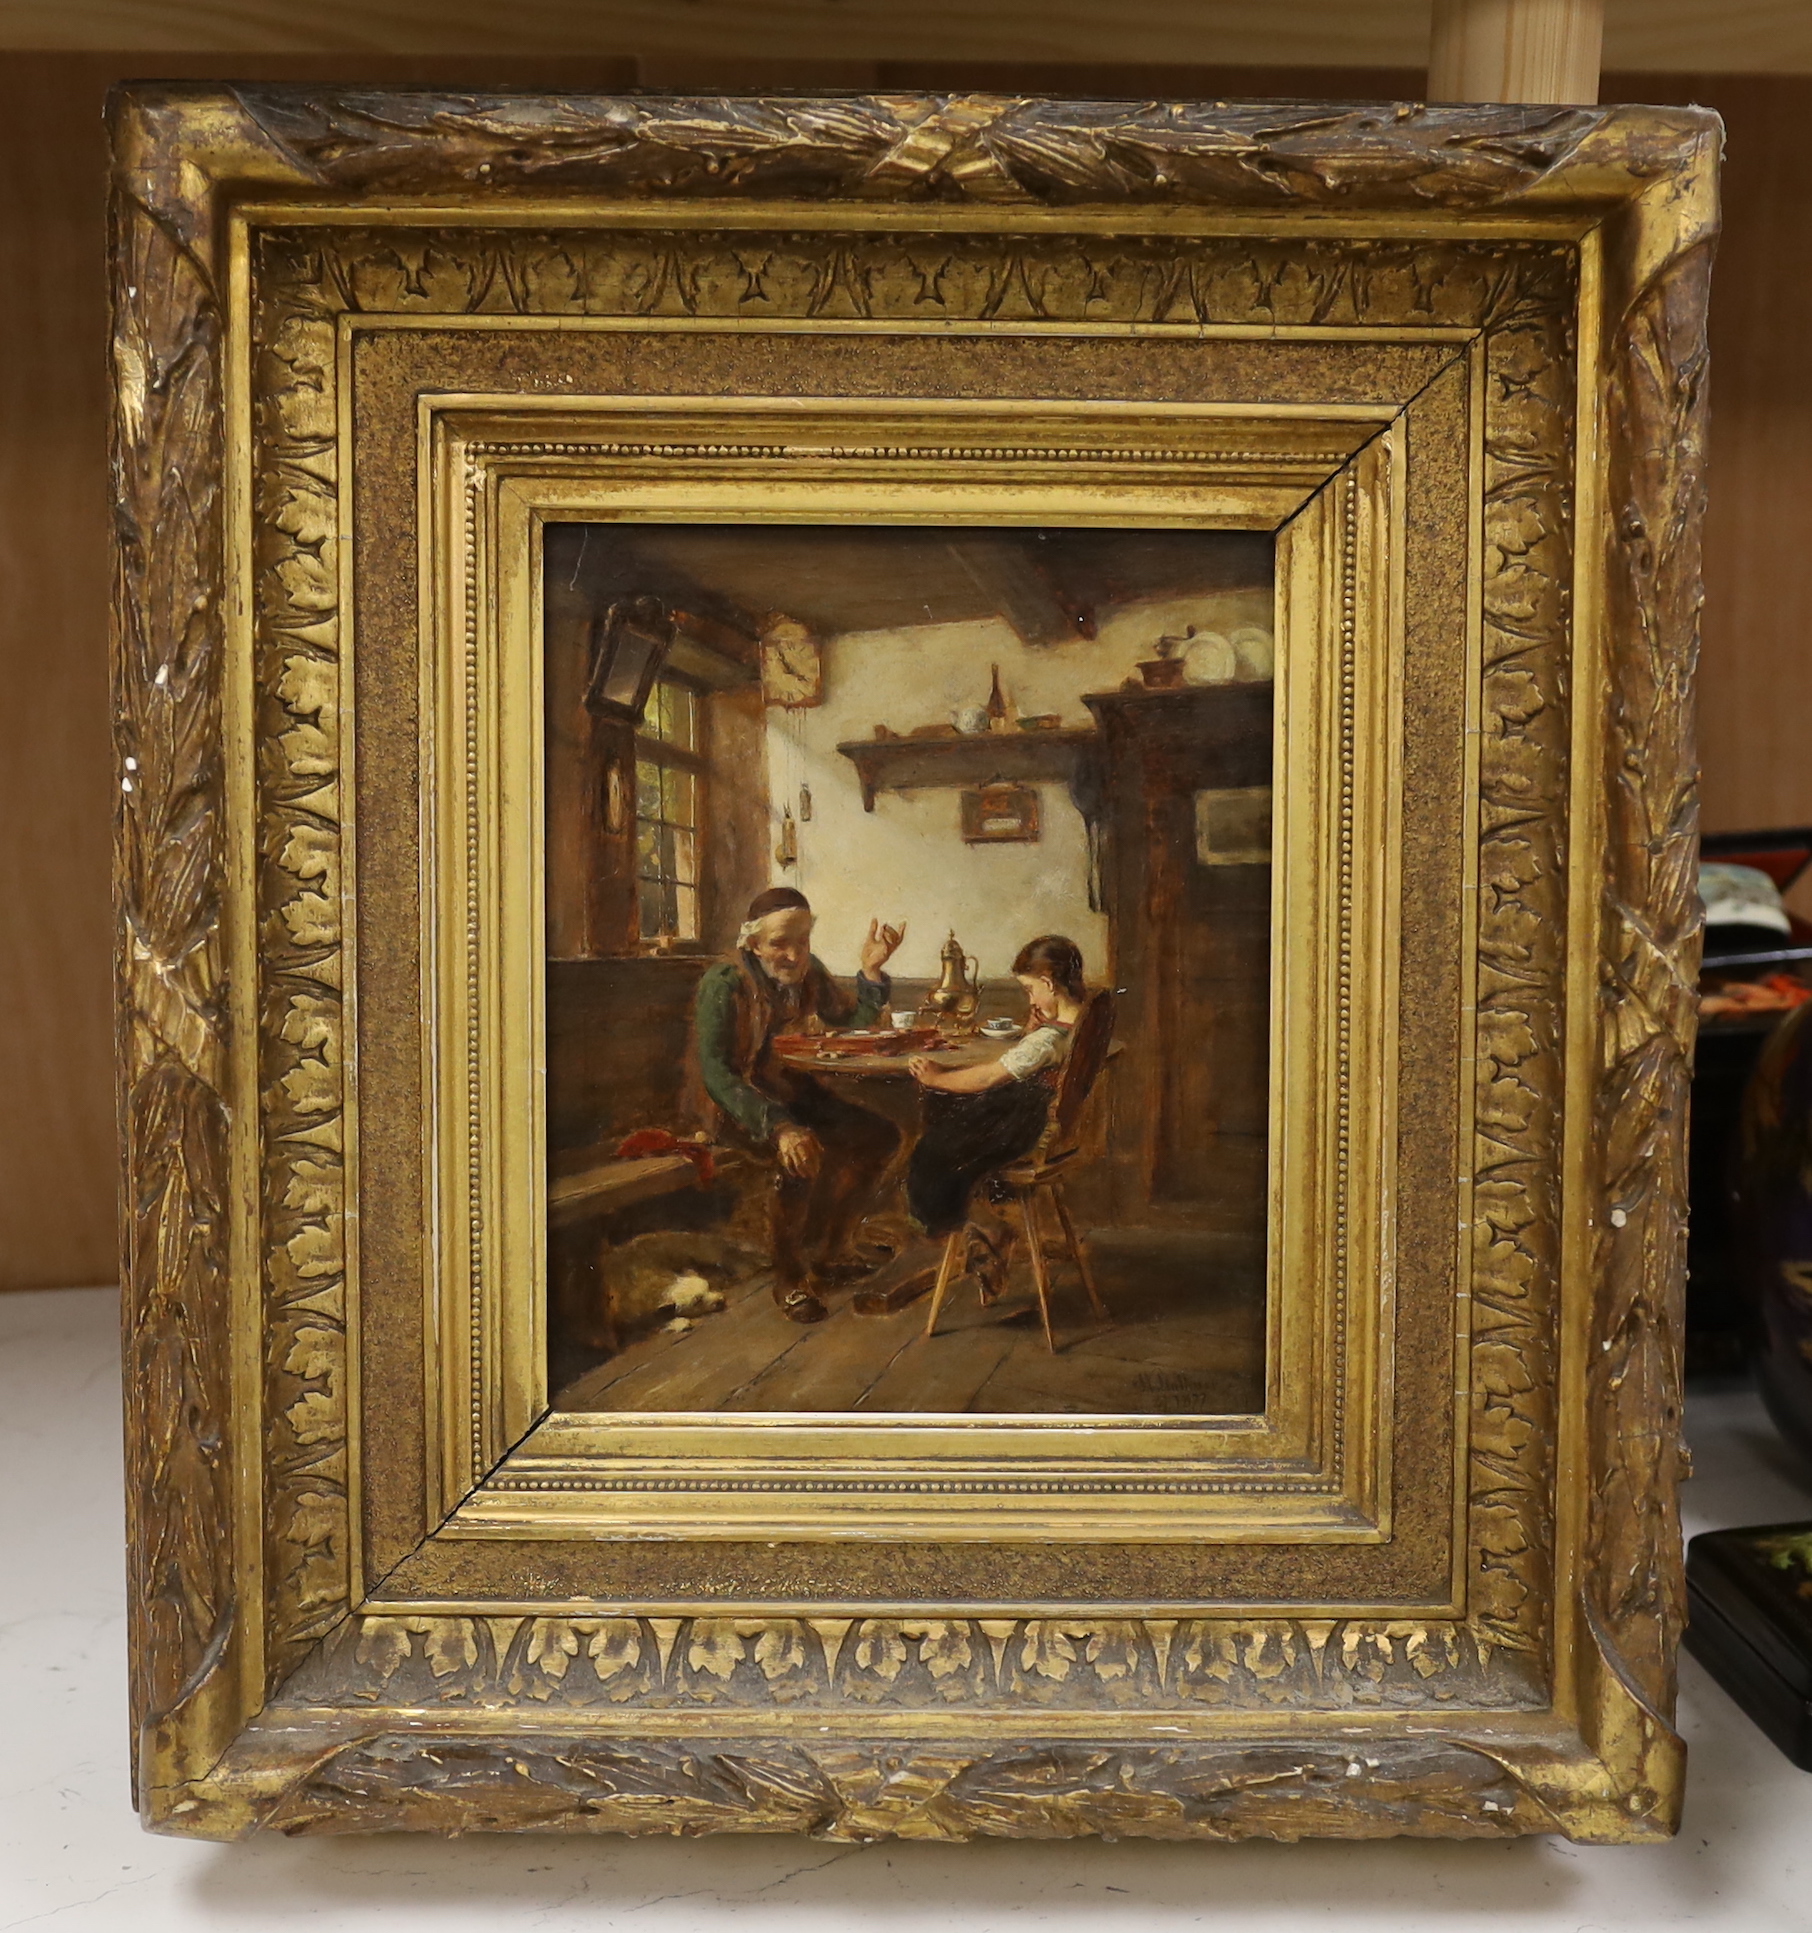 19th century Continental School, oil on board, Figures in a cottage interior, indistinctly signed and dated 1877, 21 x 17cm, housed in ornate gilt frame